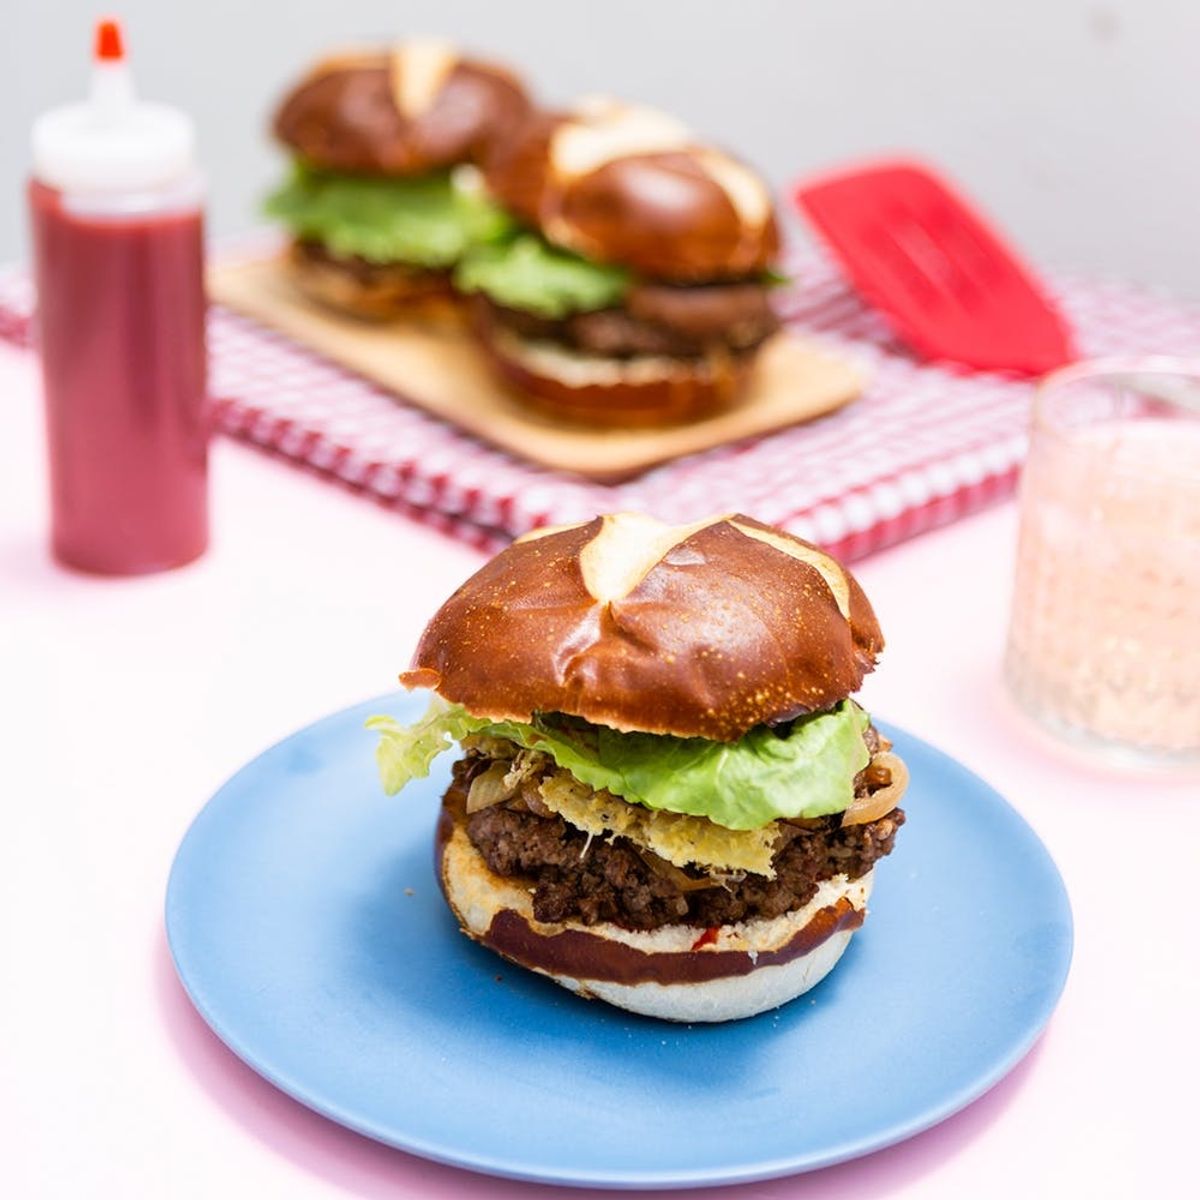 Get Your Grill Pan Ready for This Copycat Umami Burger